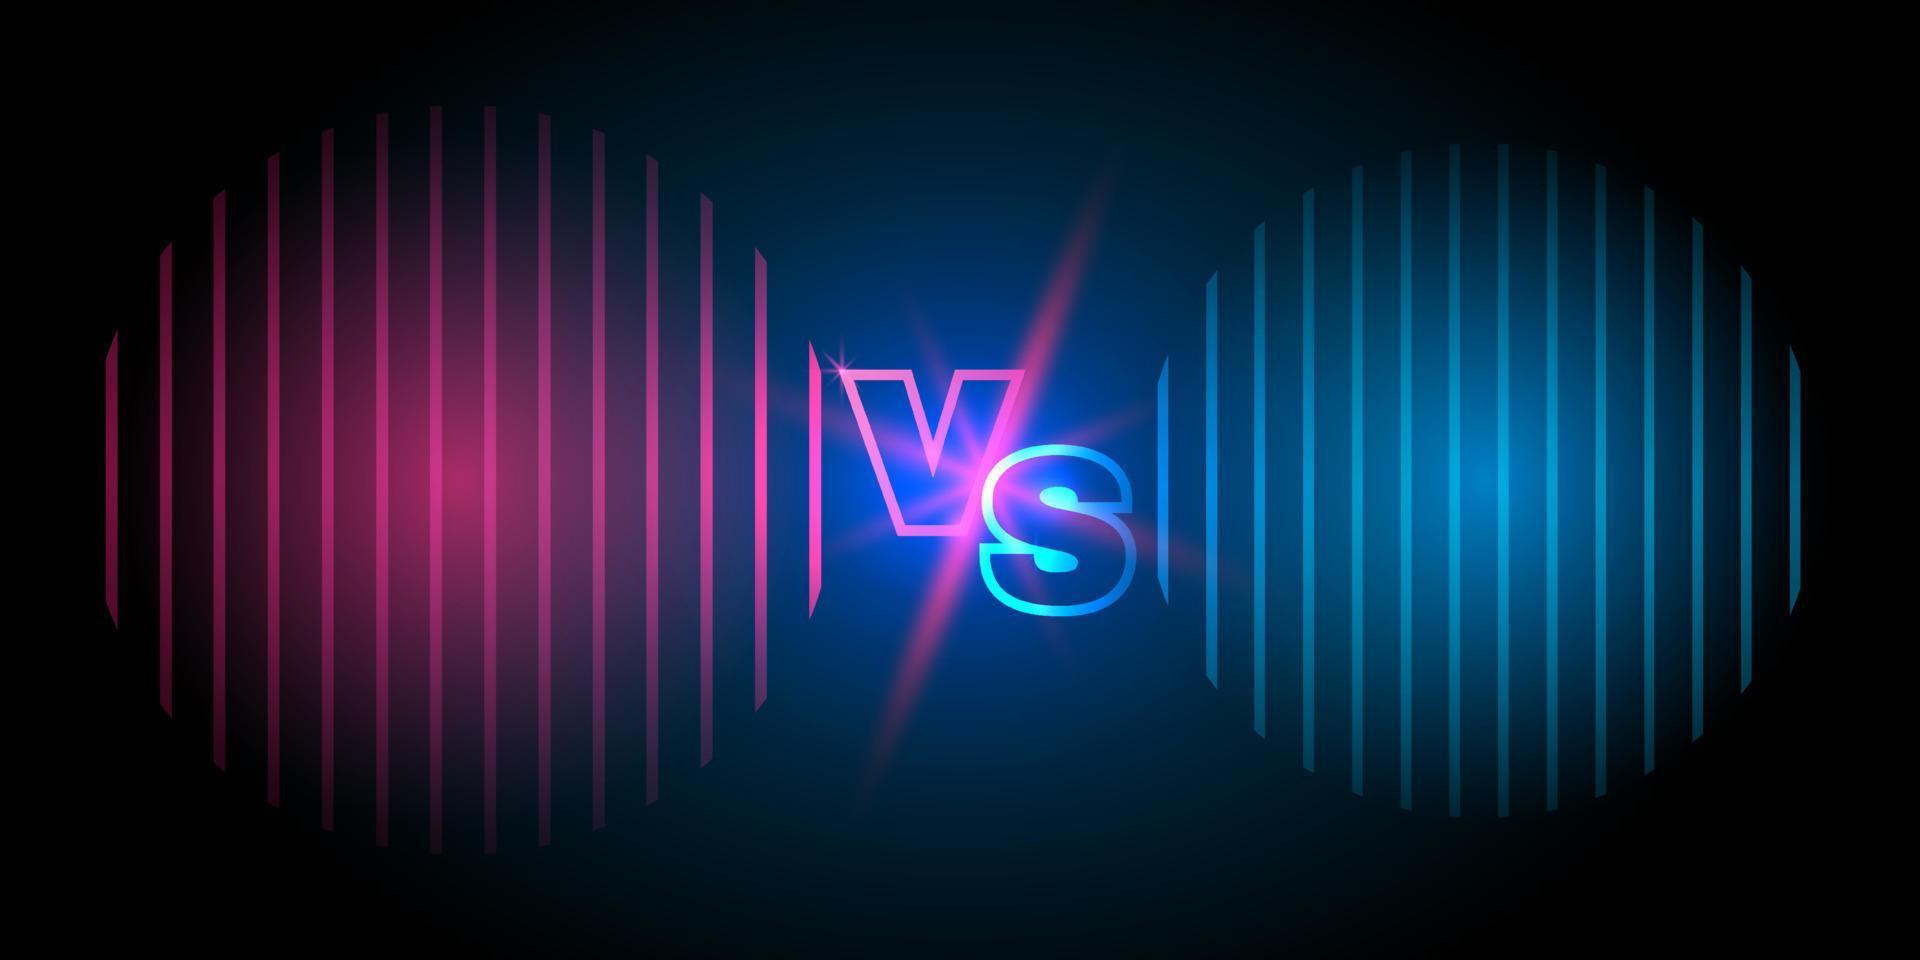 Versus screen. Banner for competition, battle, team concept. Abstract background with glowing letters. Vector illustration.